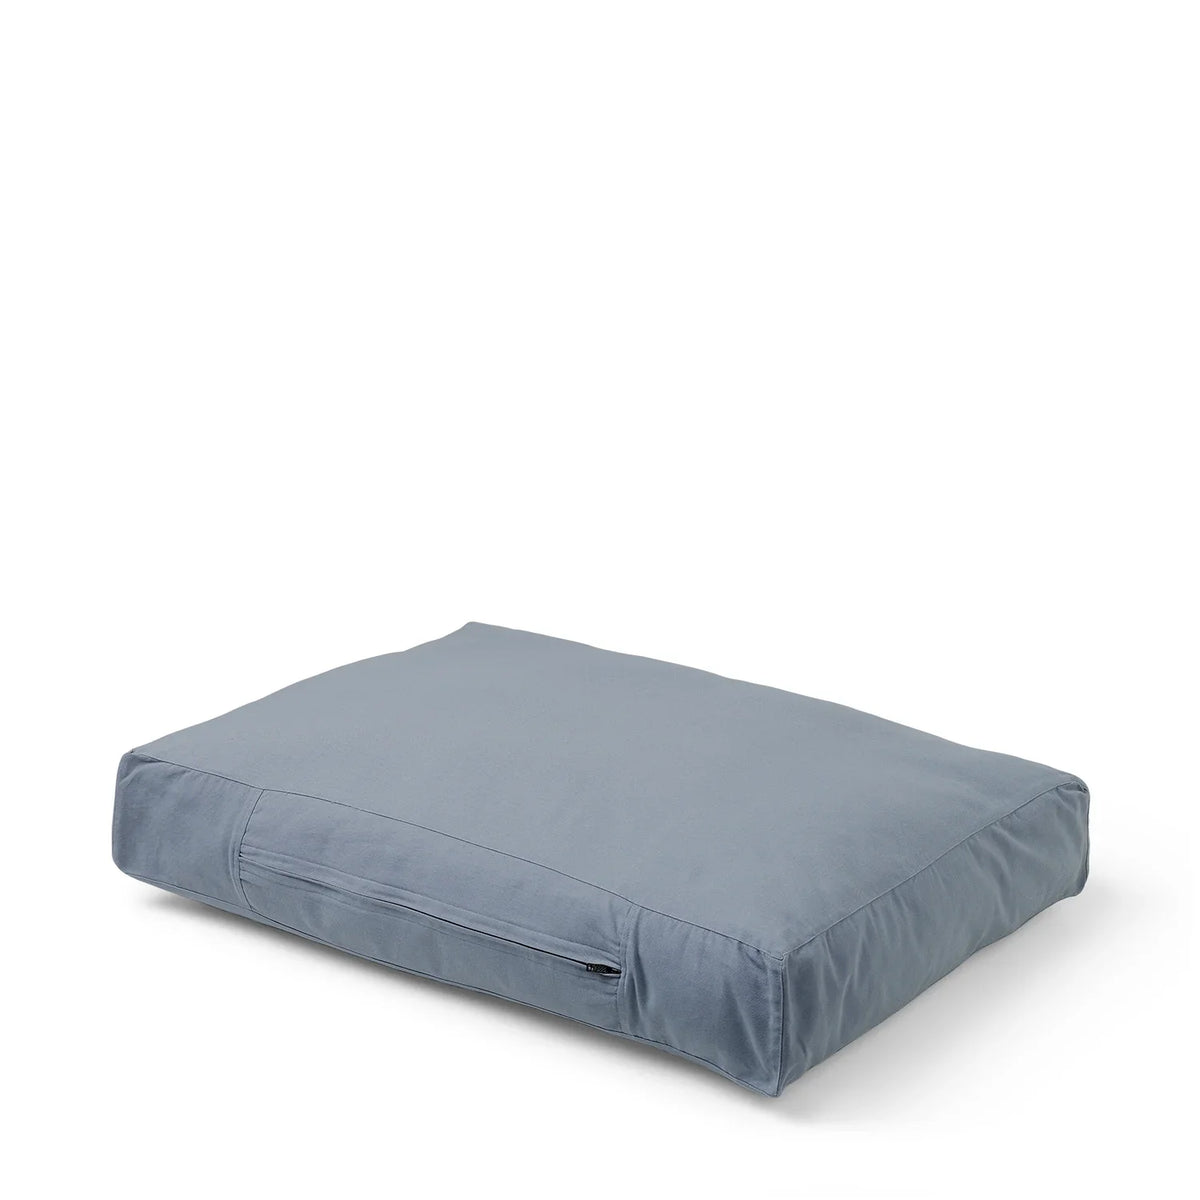 Hondenbed Faded blauw